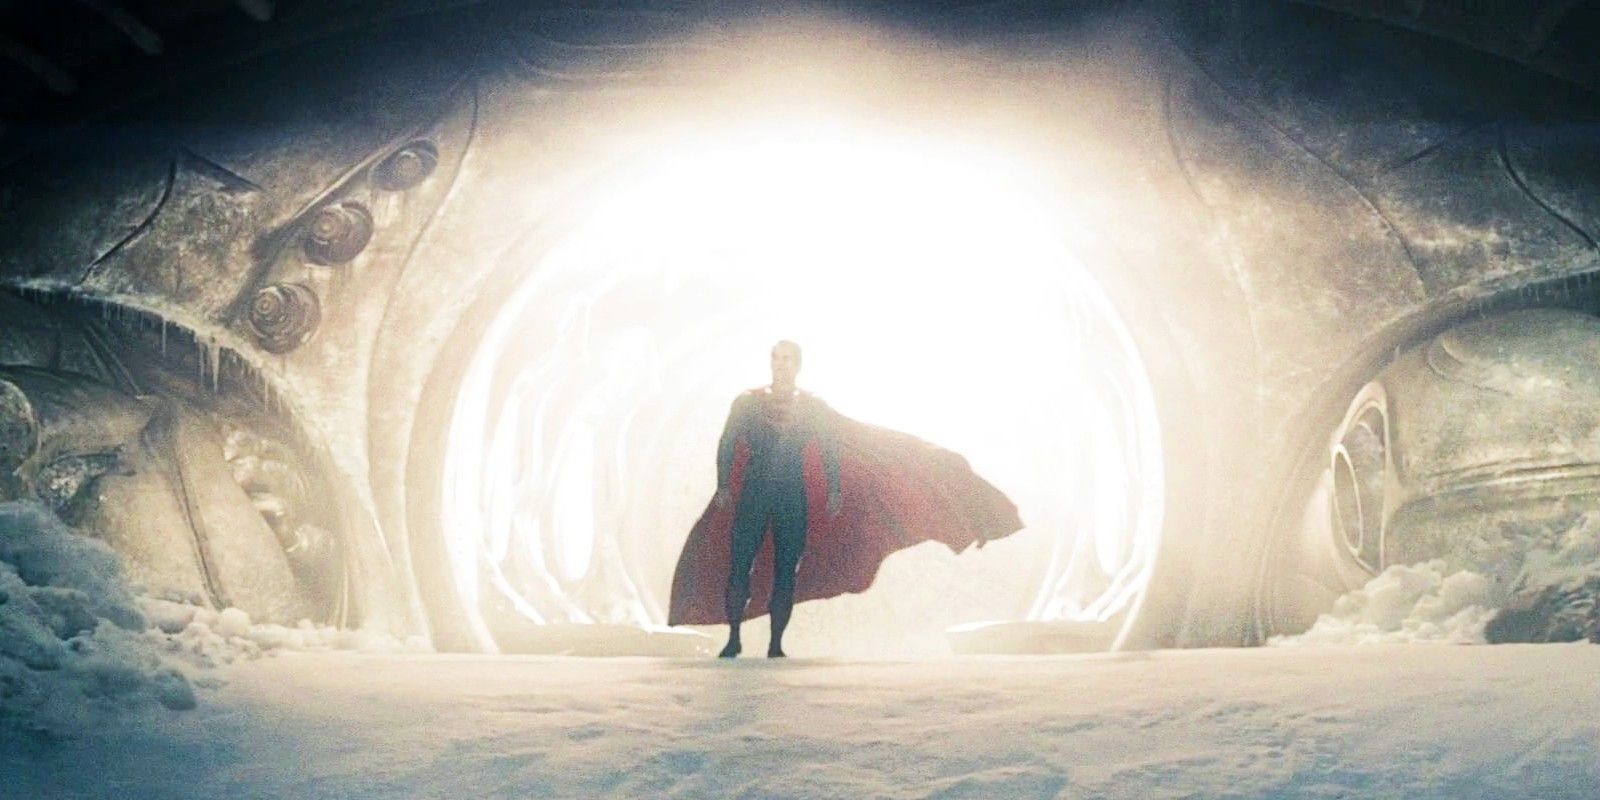 Henry Cavill's Superman Stepping Through The Doorway To The Fortress Of Solitude Framed In Light In Man of Steel